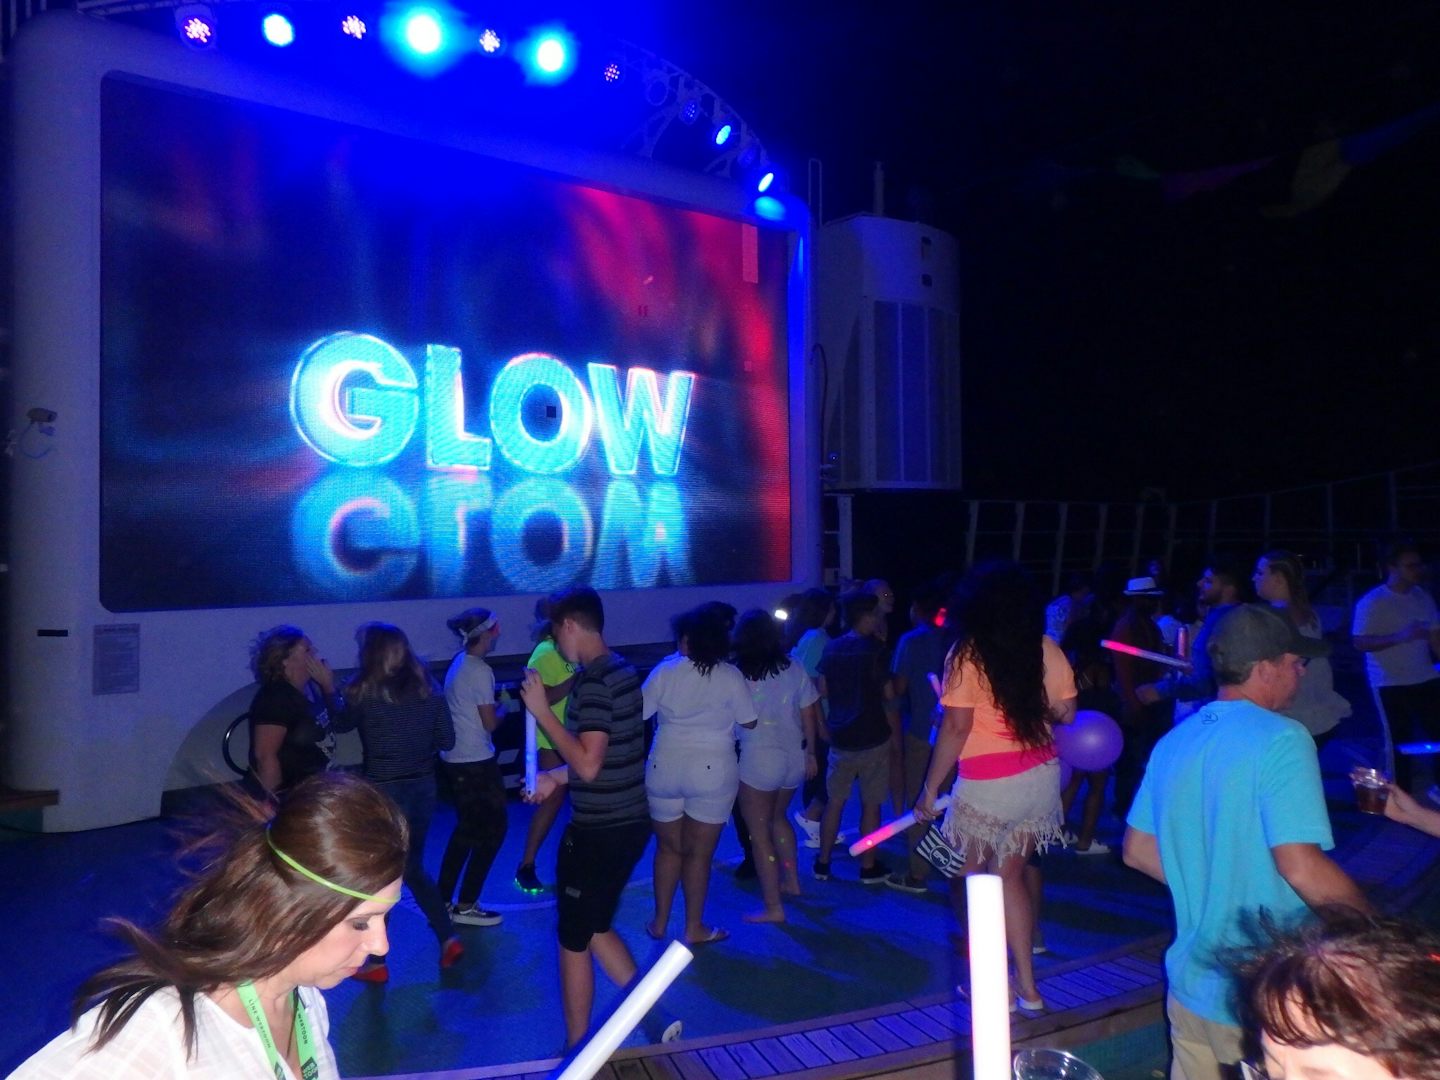 Glow night; formerly known as “White Night”.